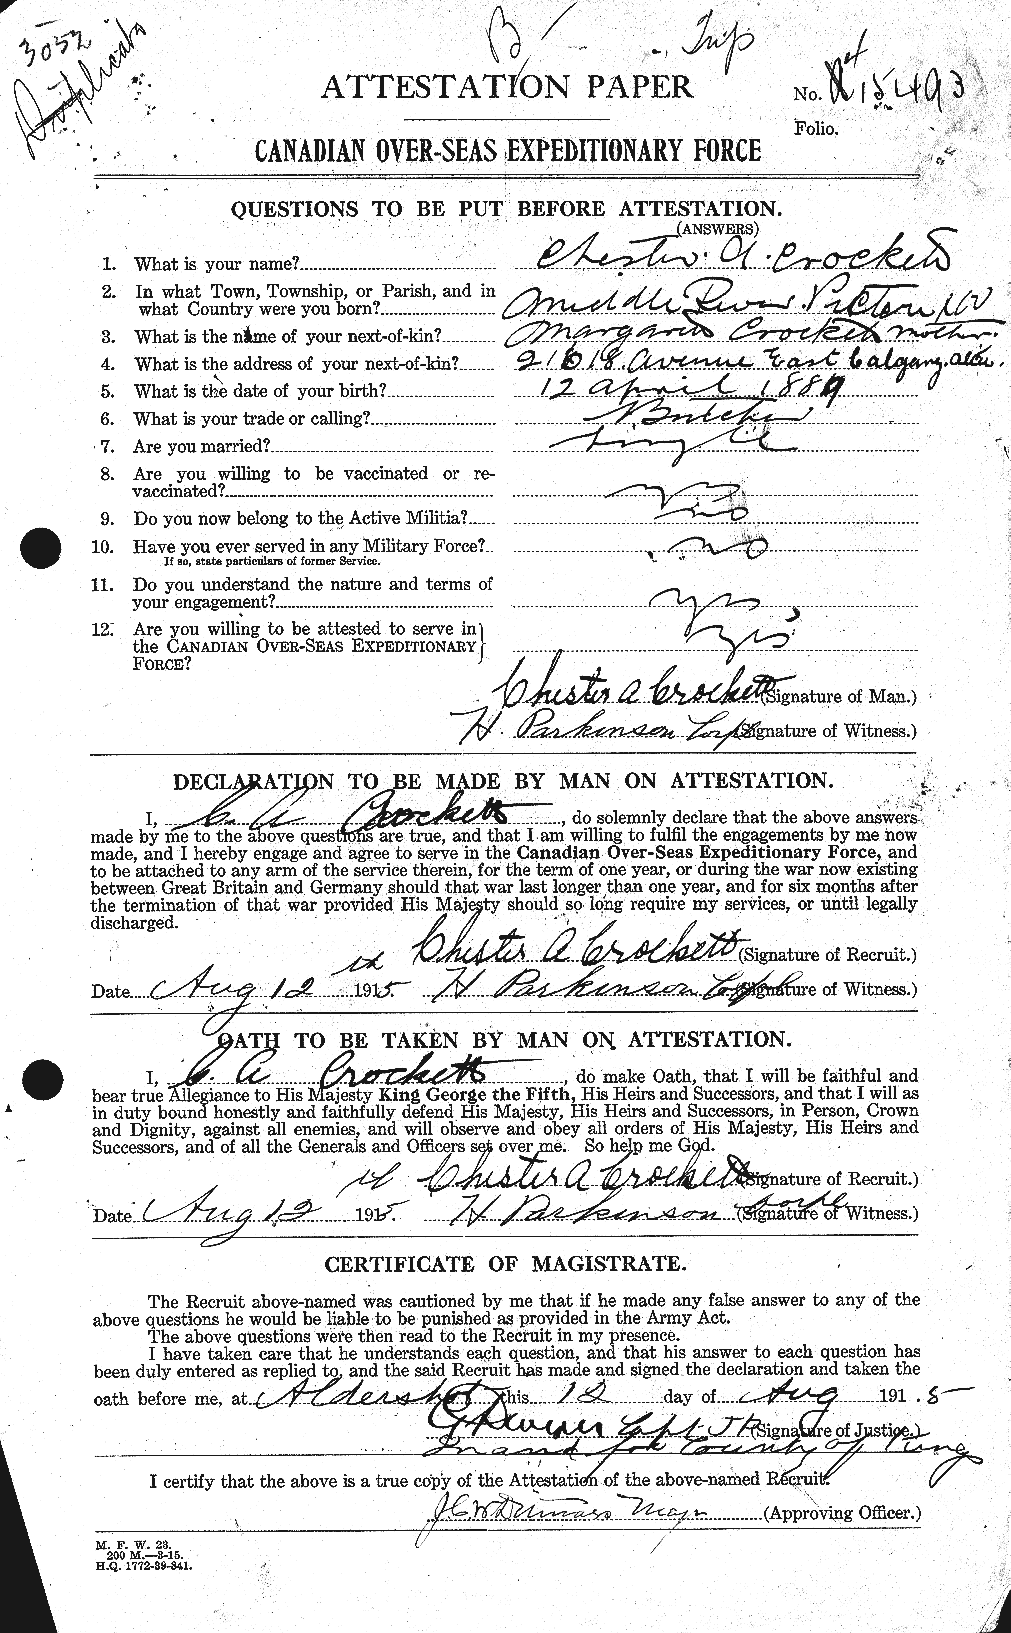 Personnel Records of the First World War - CEF 064720a